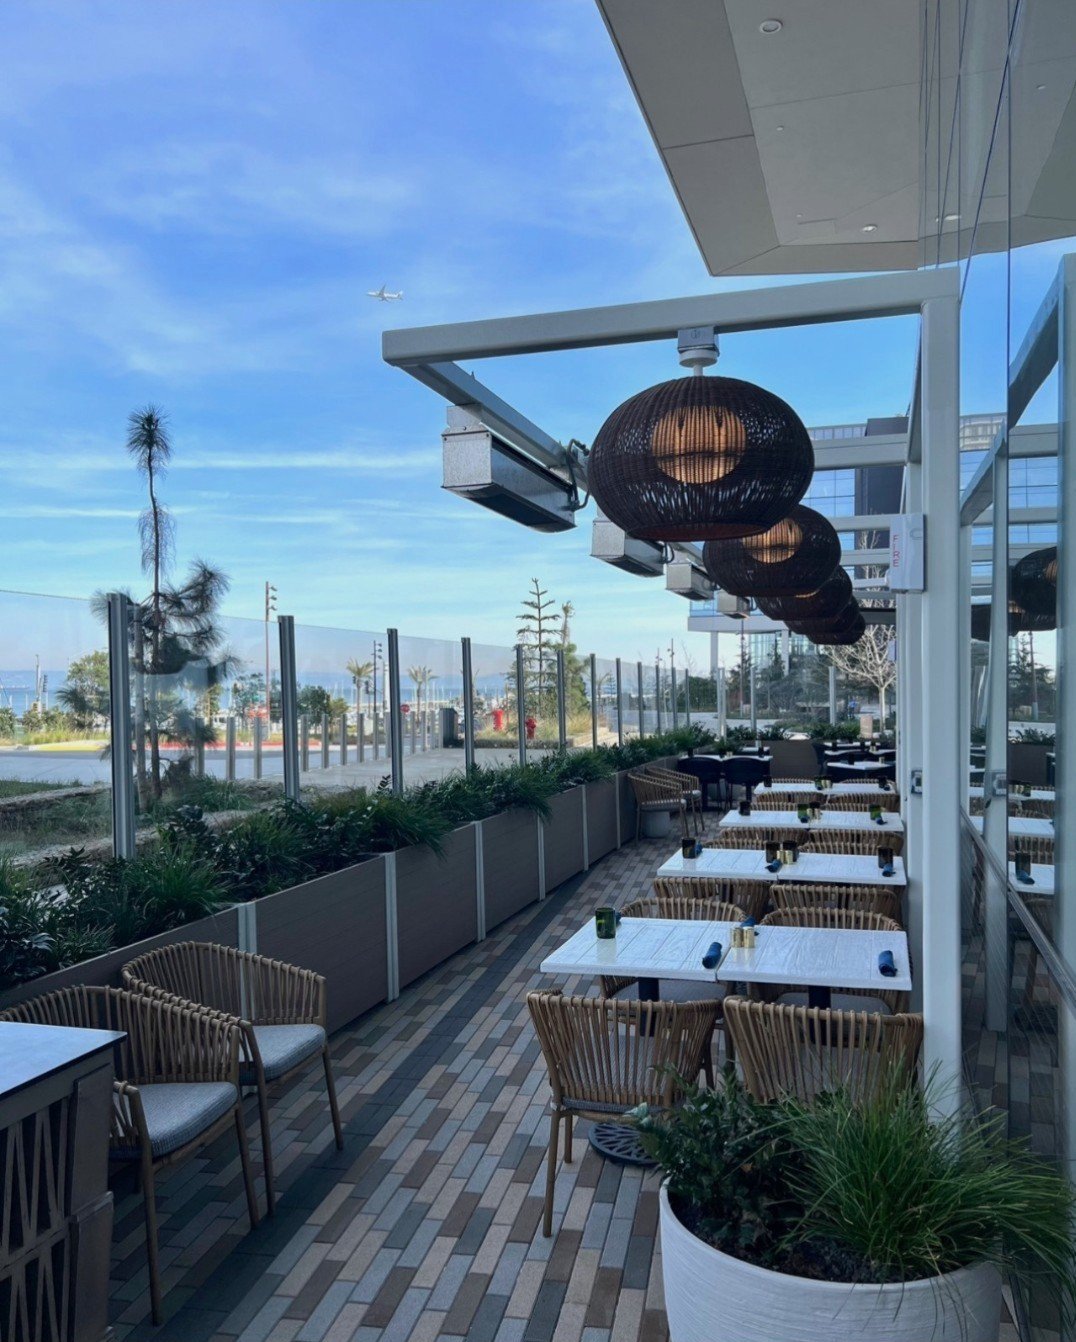 Spring is a time to get excited for the future, hopeful for good times to come and to start enjoying the warm weather at the Anecdote patio 😍🌞🌻 Did you know we also have a beautiful marina view? 

#southsanfrancisco #southcity #dalycity #sffoodie 